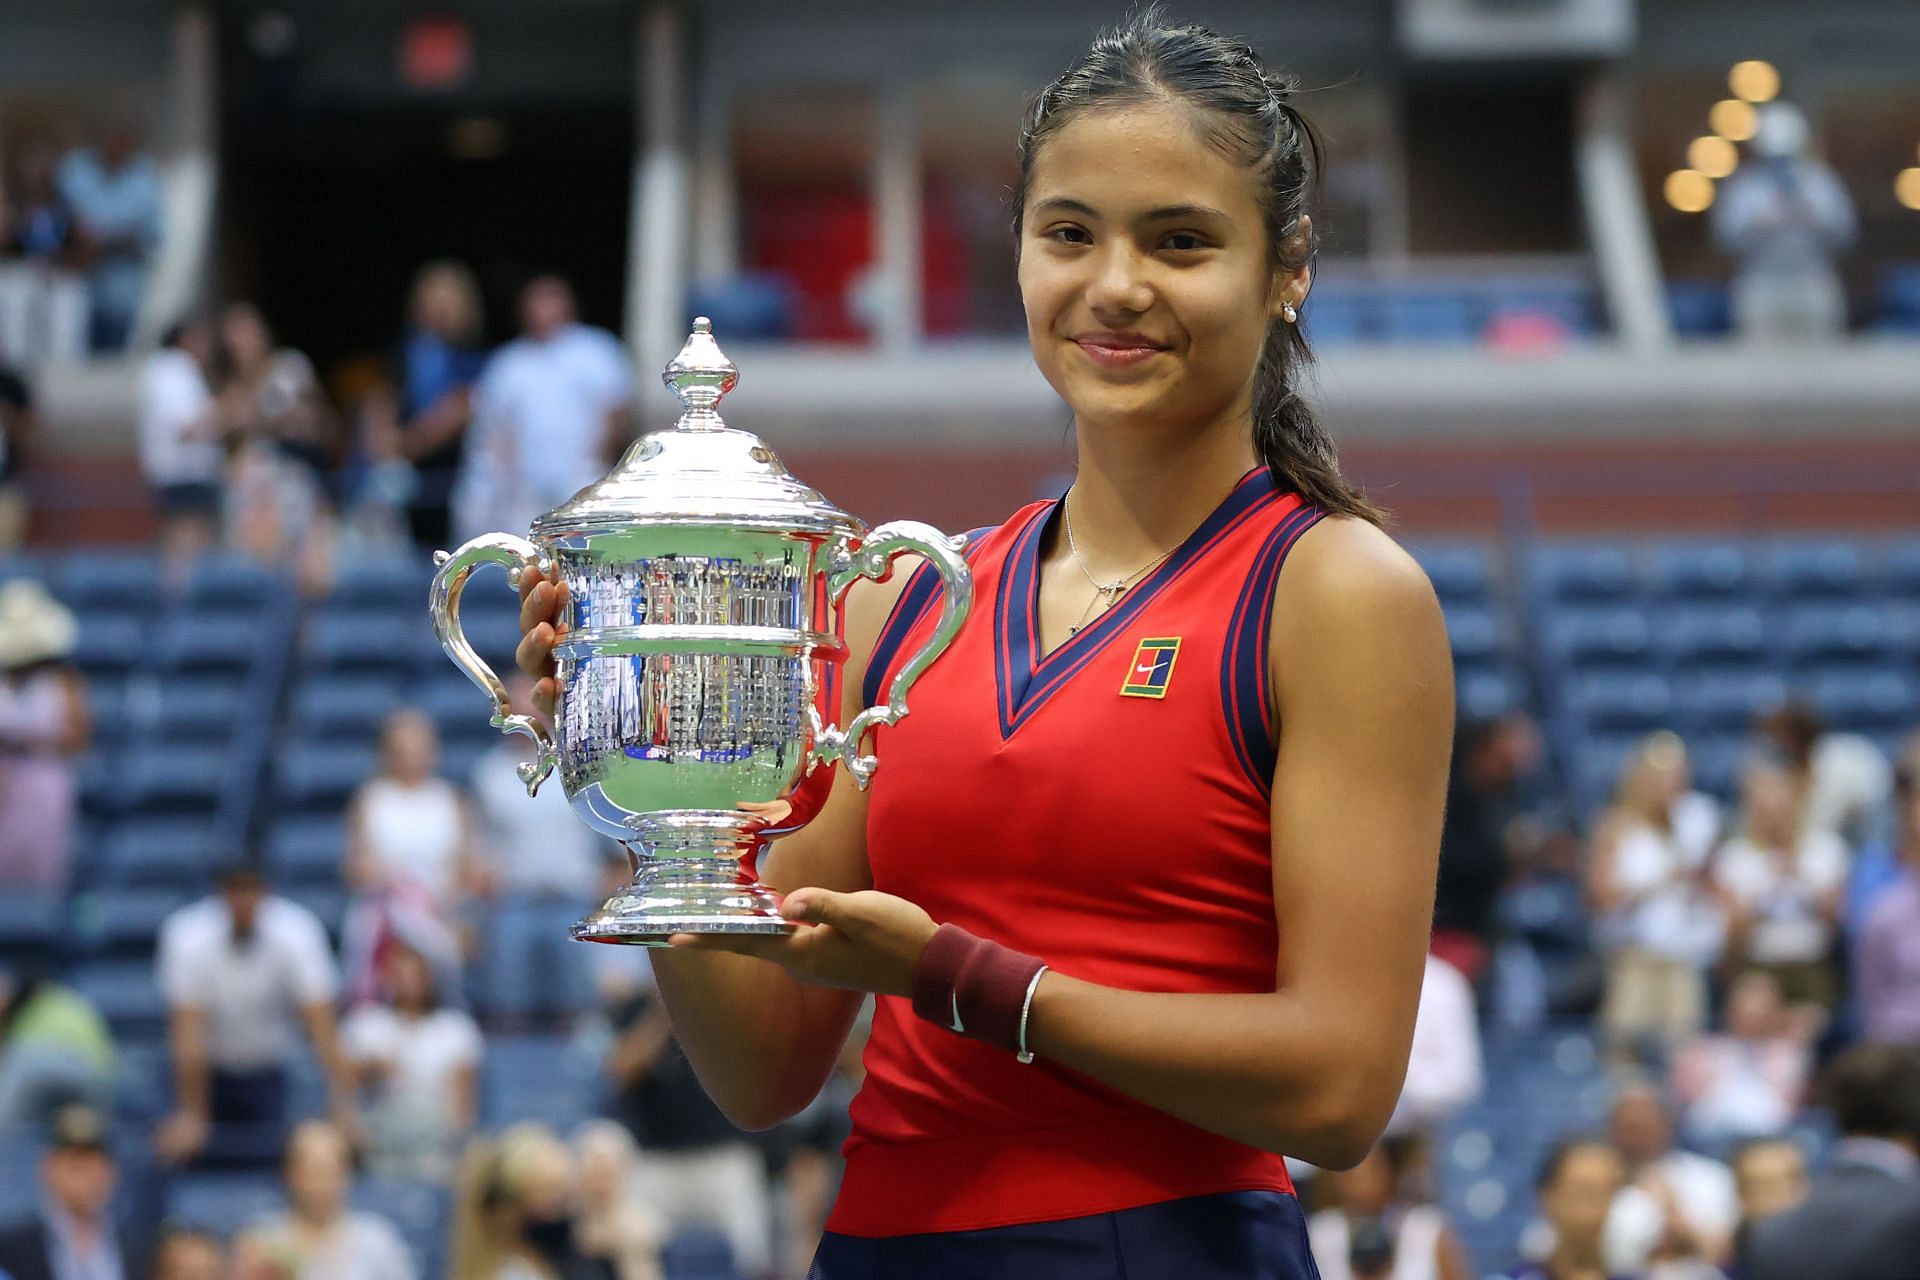 US Open 2022 Schedule TV schedule, start time, order of play, live streaming details and more Day 2